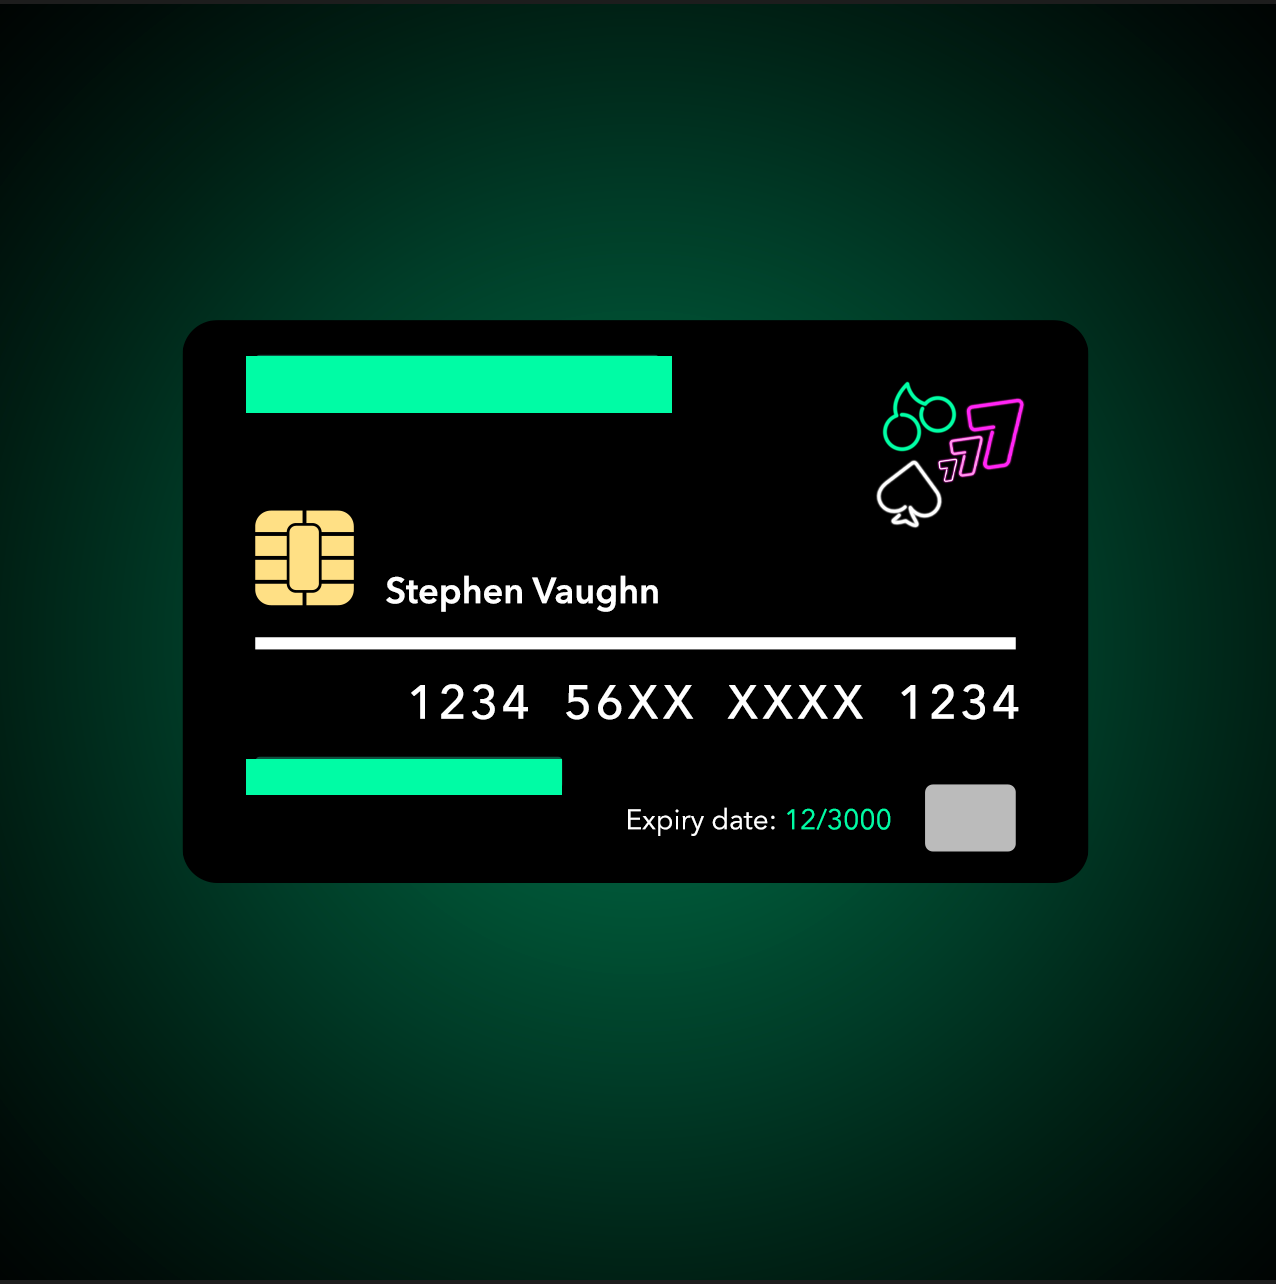 Picture of credit card front